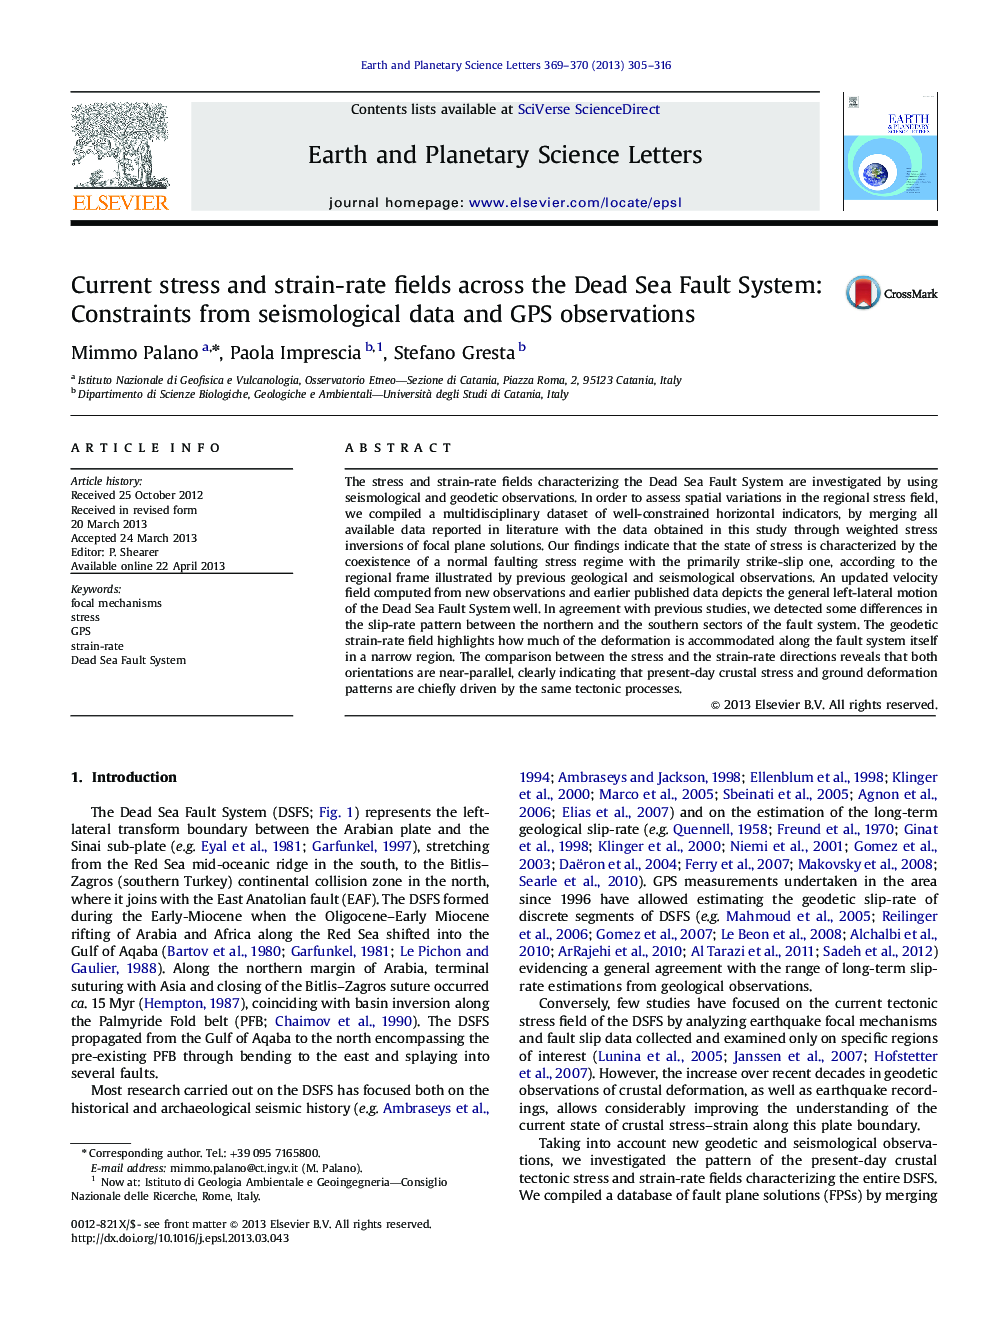 Current stress and strain-rate fields across the Dead Sea Fault System: Constraints from seismological data and GPS observations